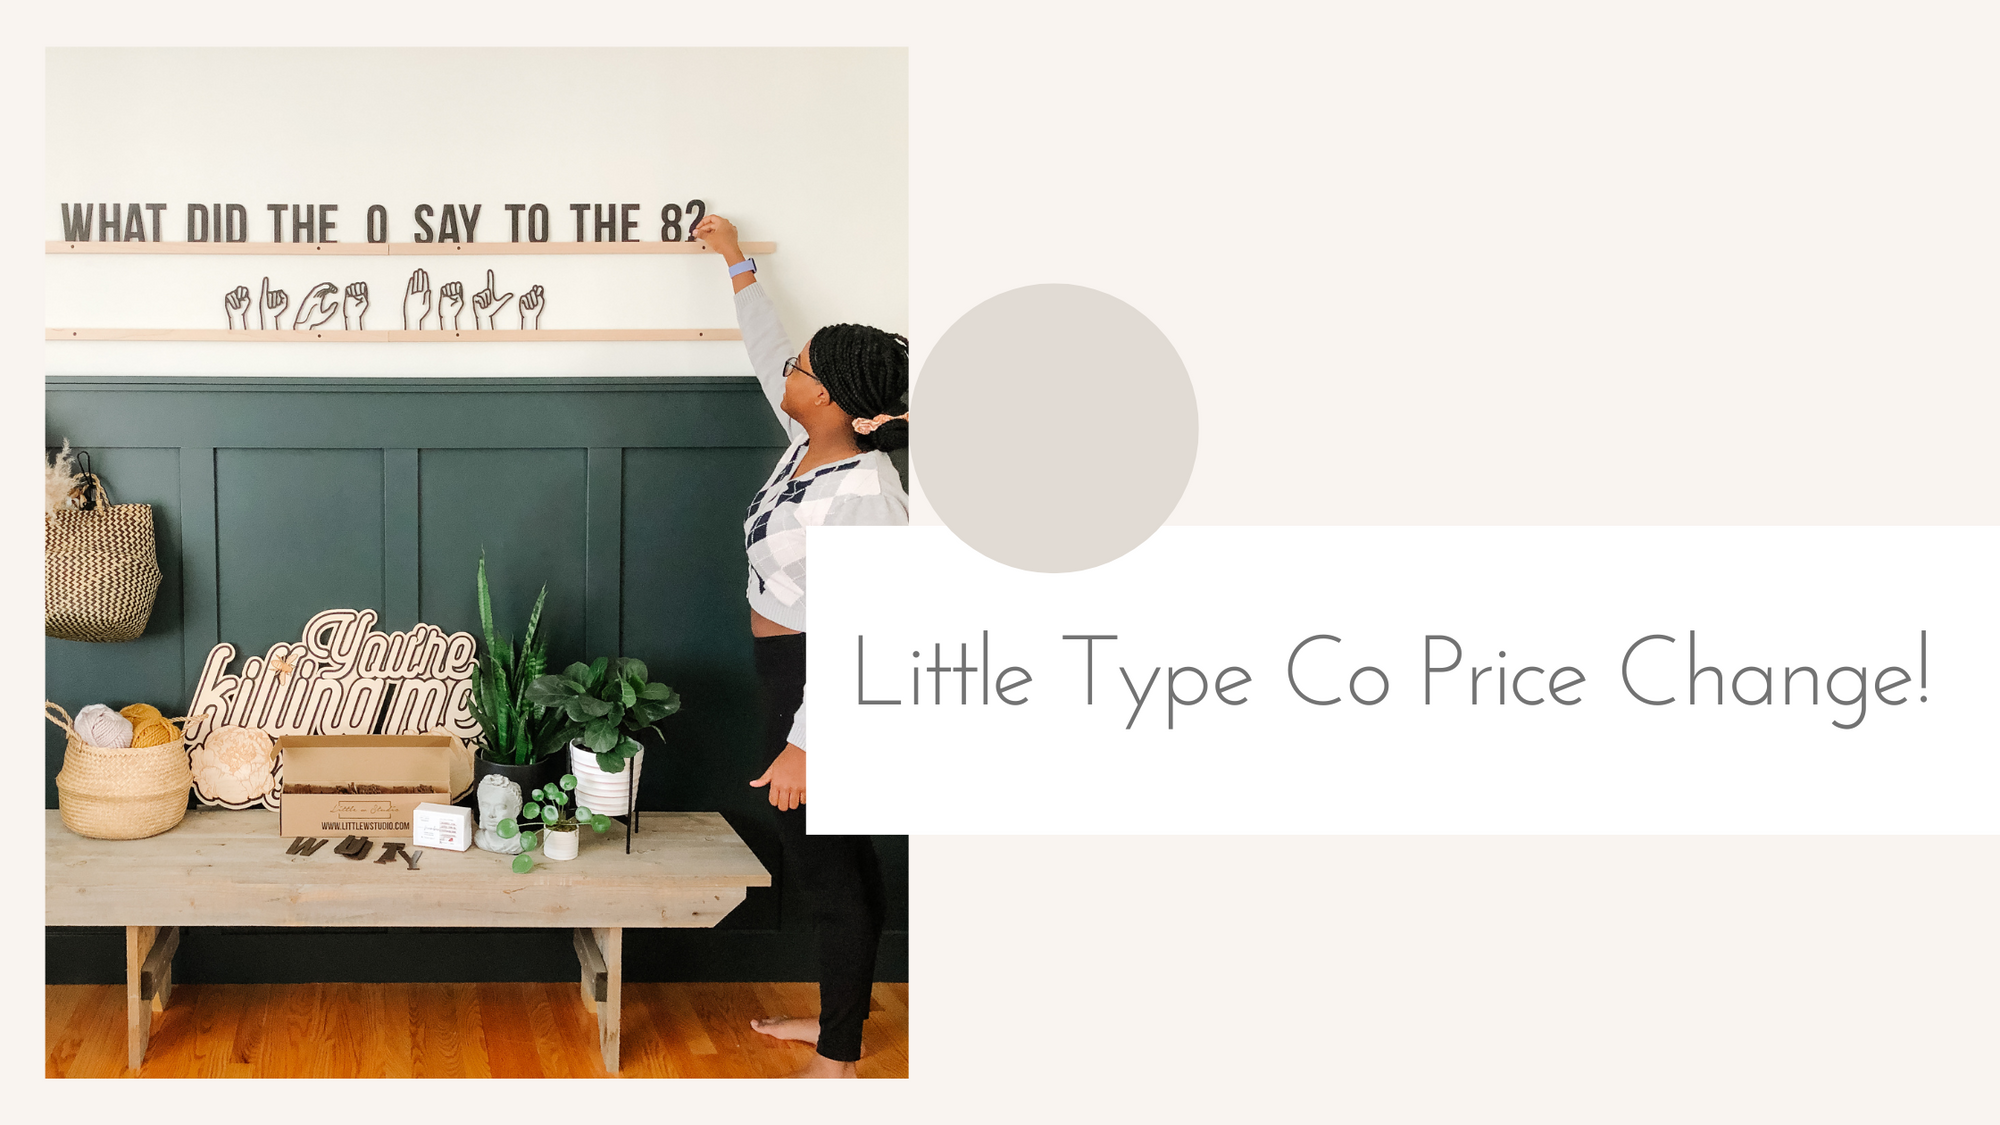 Little Type Co Price Change!